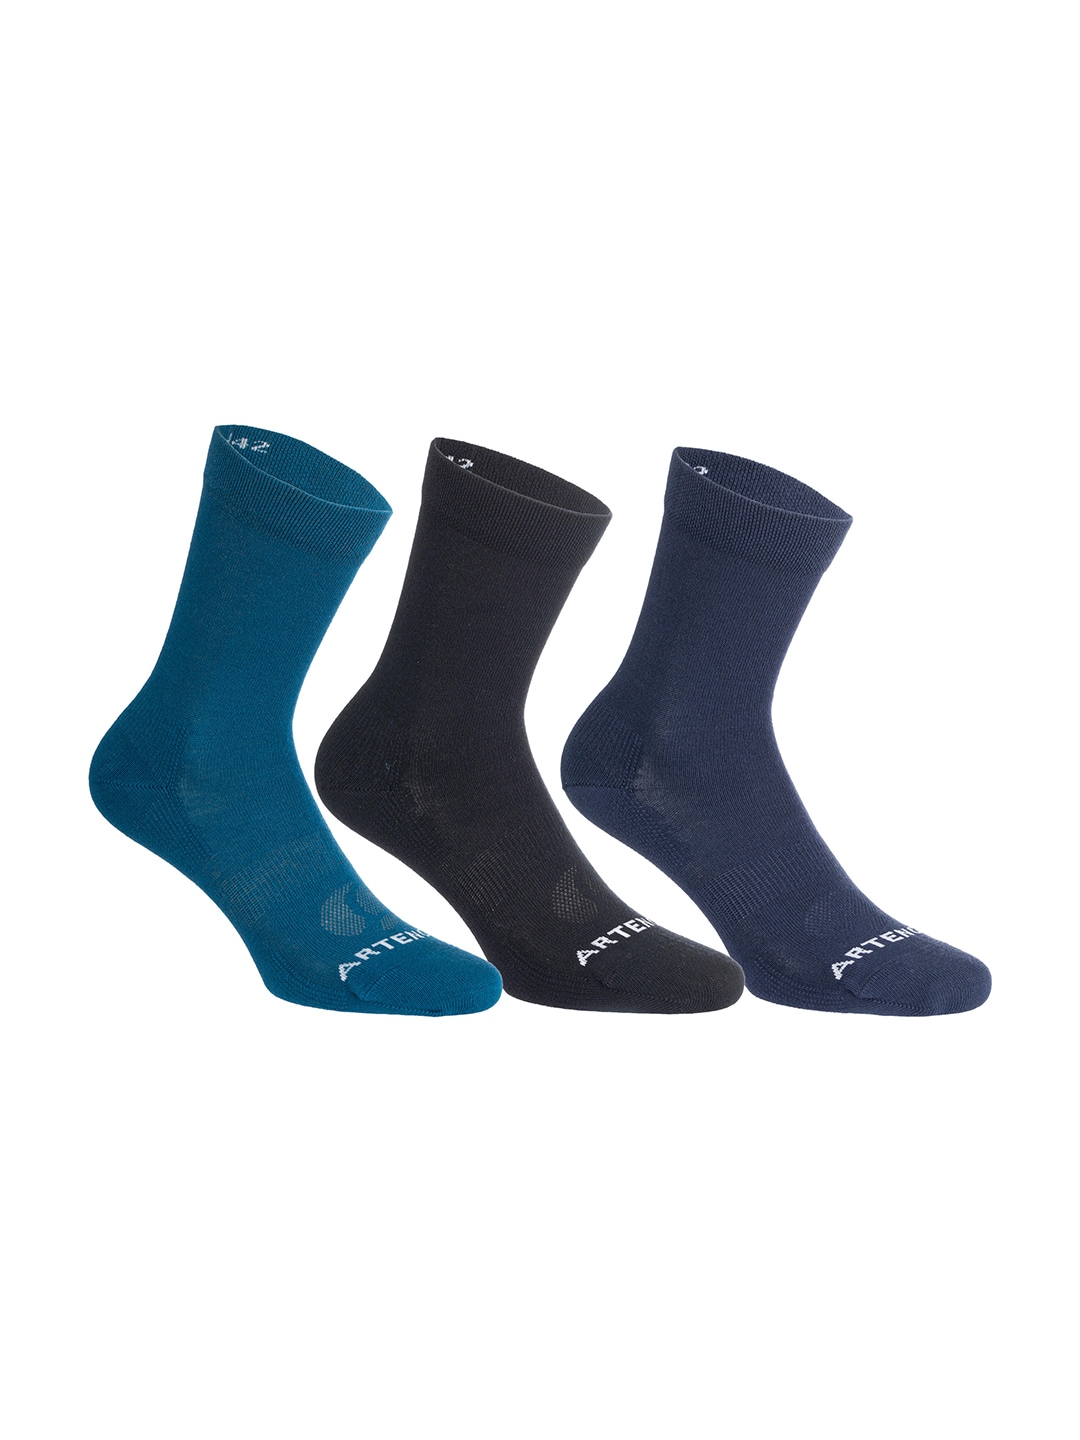 Artengo By Decathlon Set Of 3 Solid High Sports RS 160 Socks Price in India